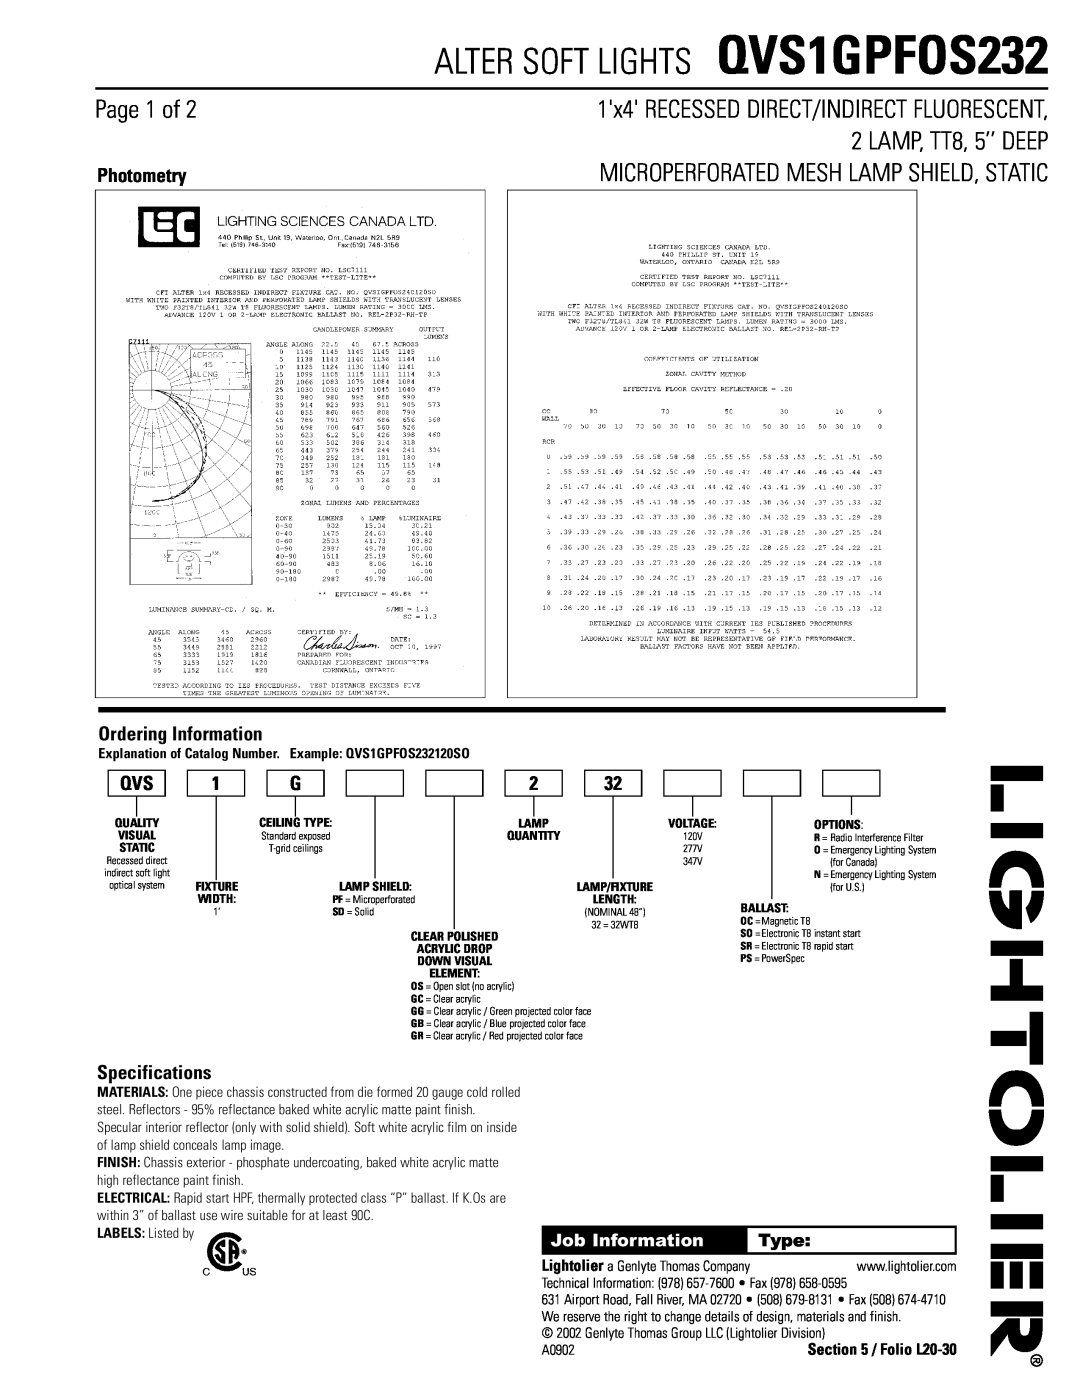 Lightolier Photometry, Ordering Information, Specifications, Folio L20-30, ALTER SOFT LIGHTS QVS1GPFOS232, Page 1 of 